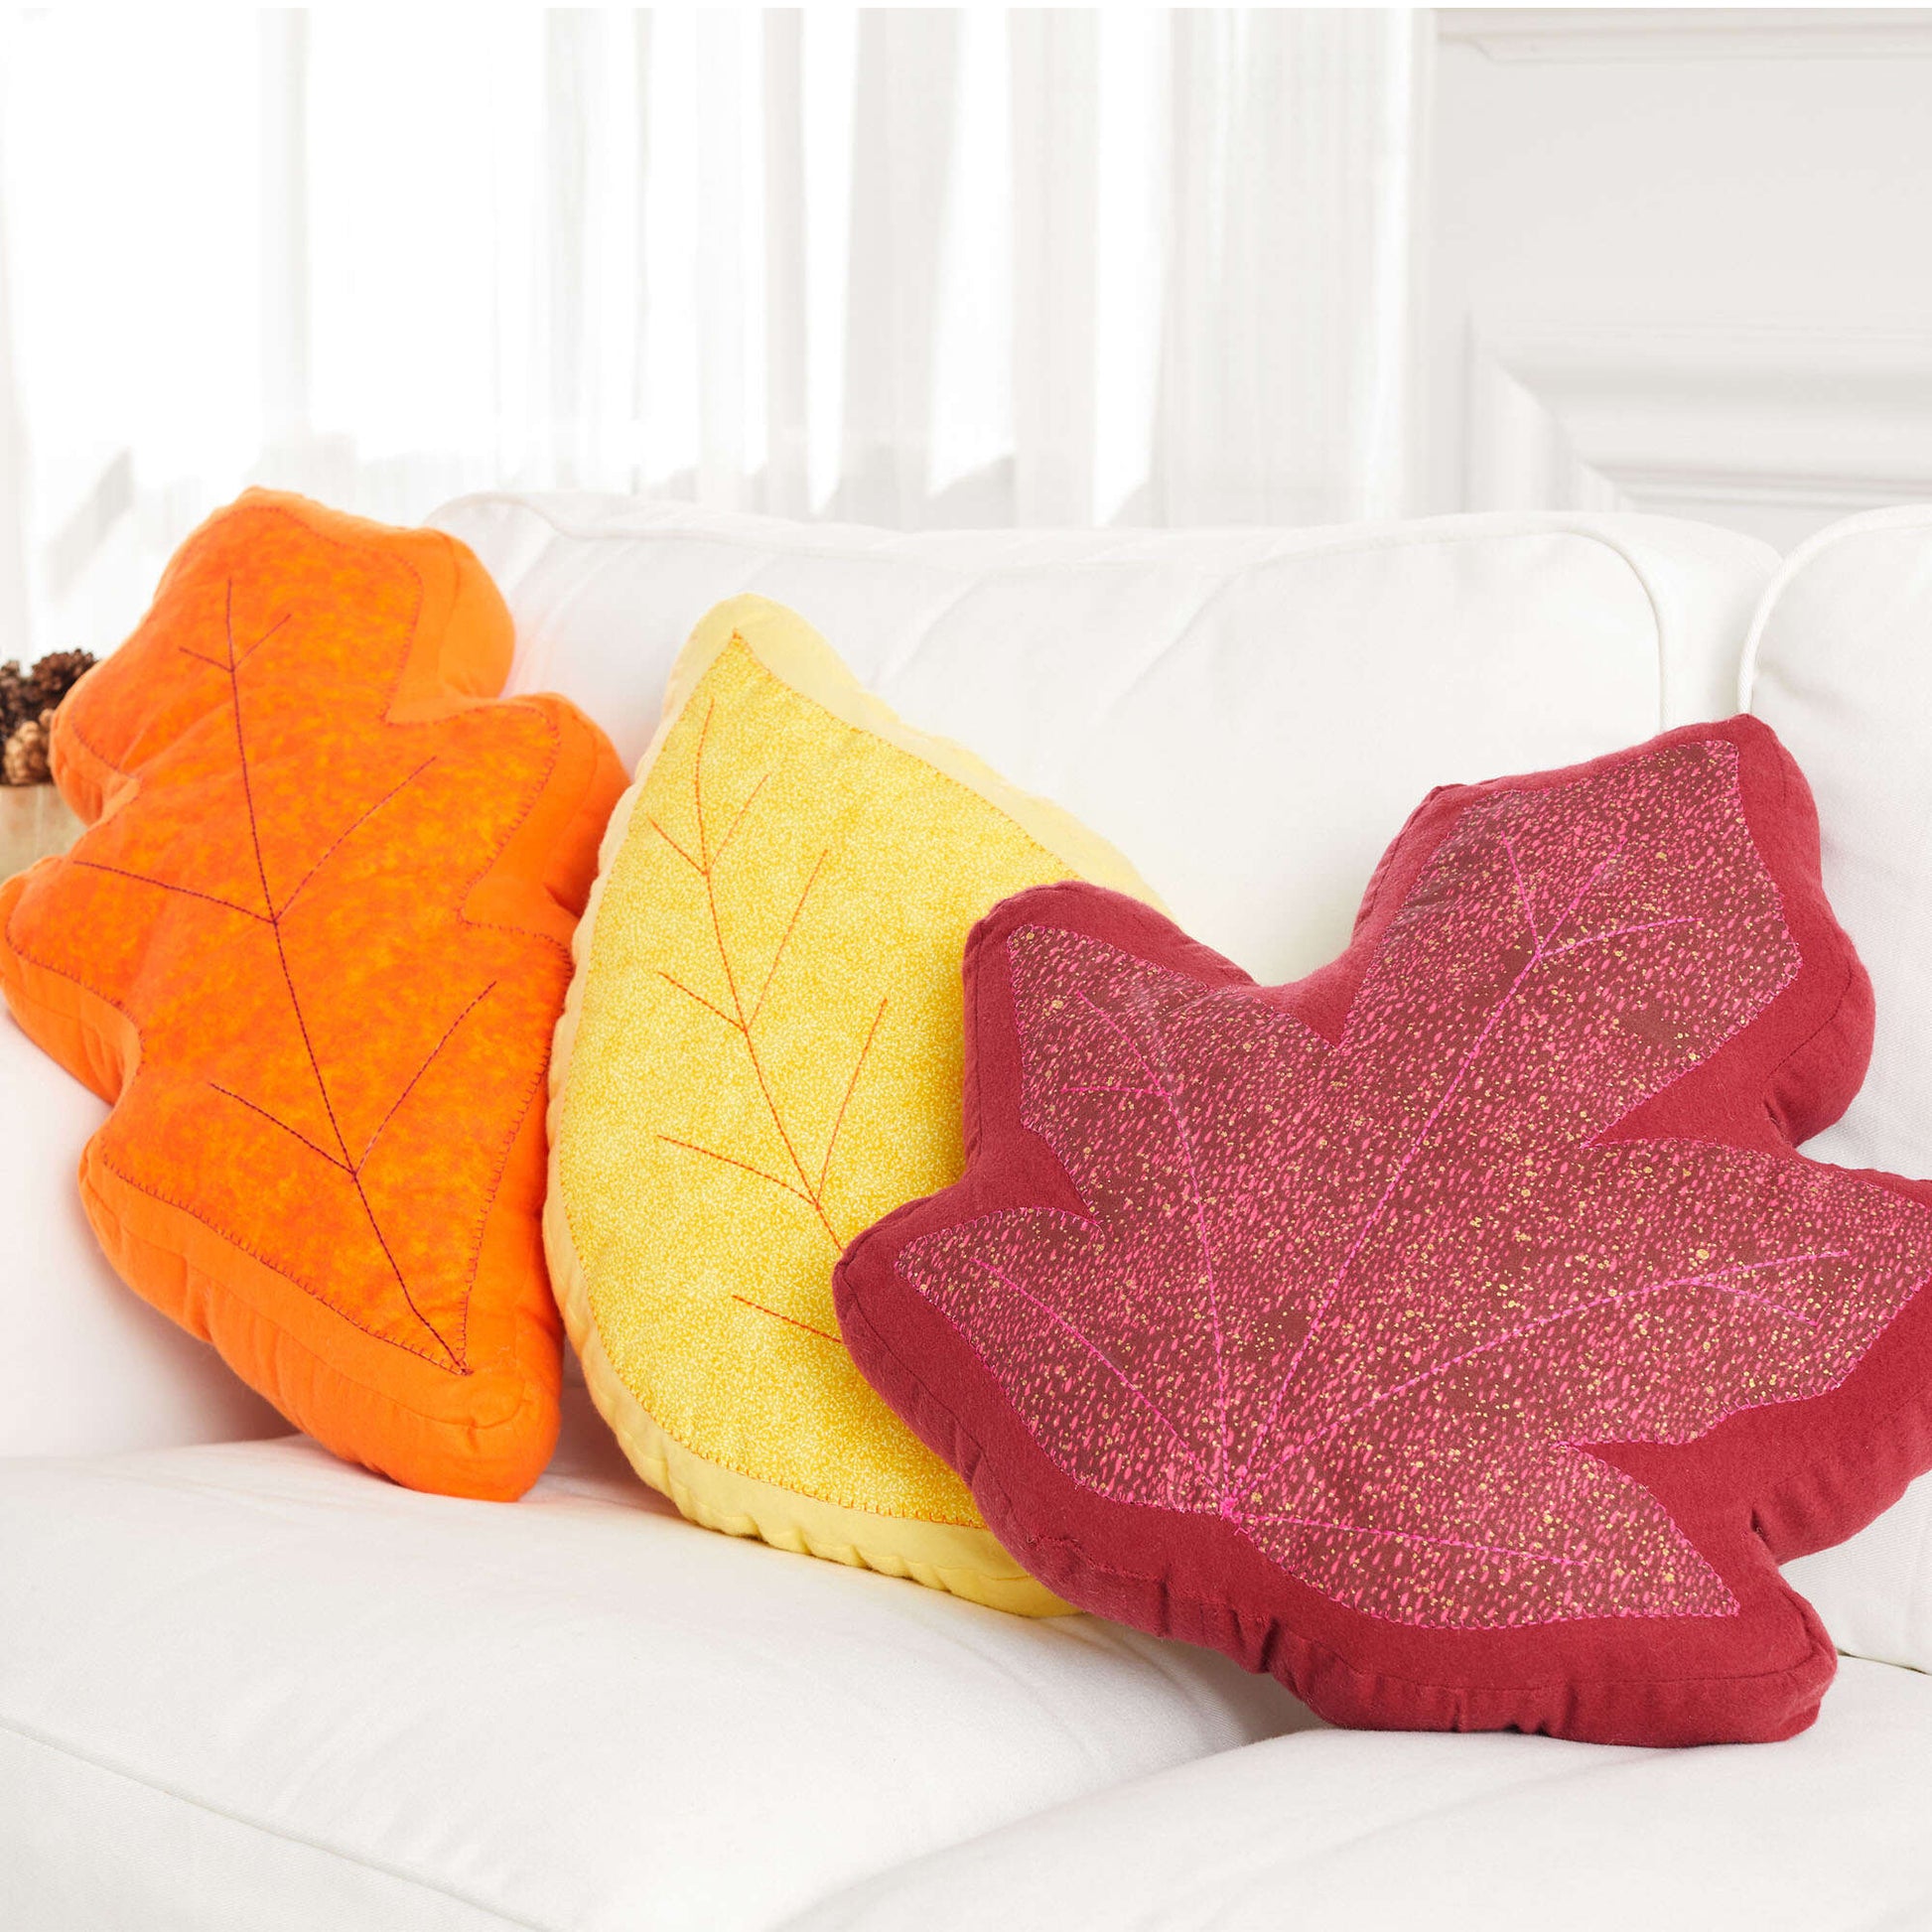 Free Coats & Clark Sewing Autumn Leaves Pillows Pattern